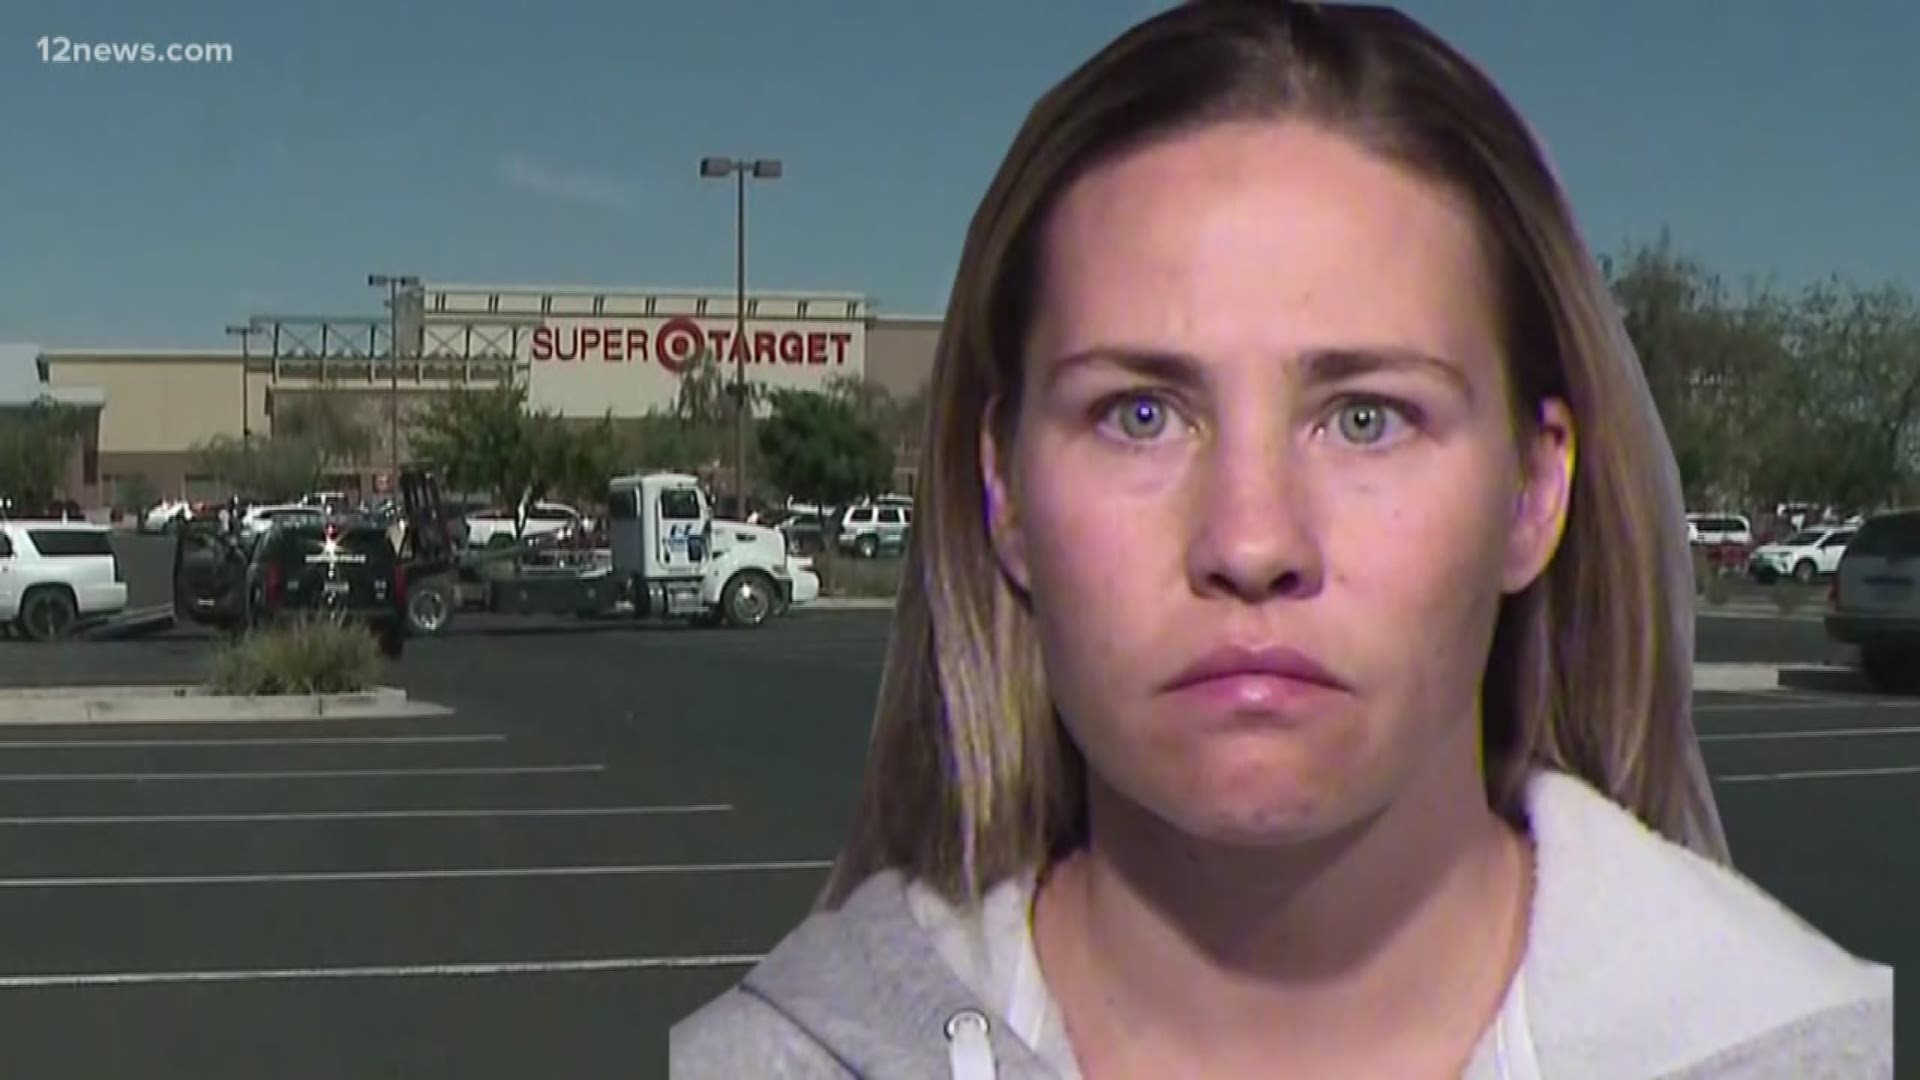 A Goodyear mom, Stacey Holly, is accused of leaving her 5-month-old daughter in the car for nearly an hour on Sunday. She was arrested and told officers she was distracted when she and her sister arrived at a Target store. She was released on her own recognizance. The condition of the baby is said to be stable.